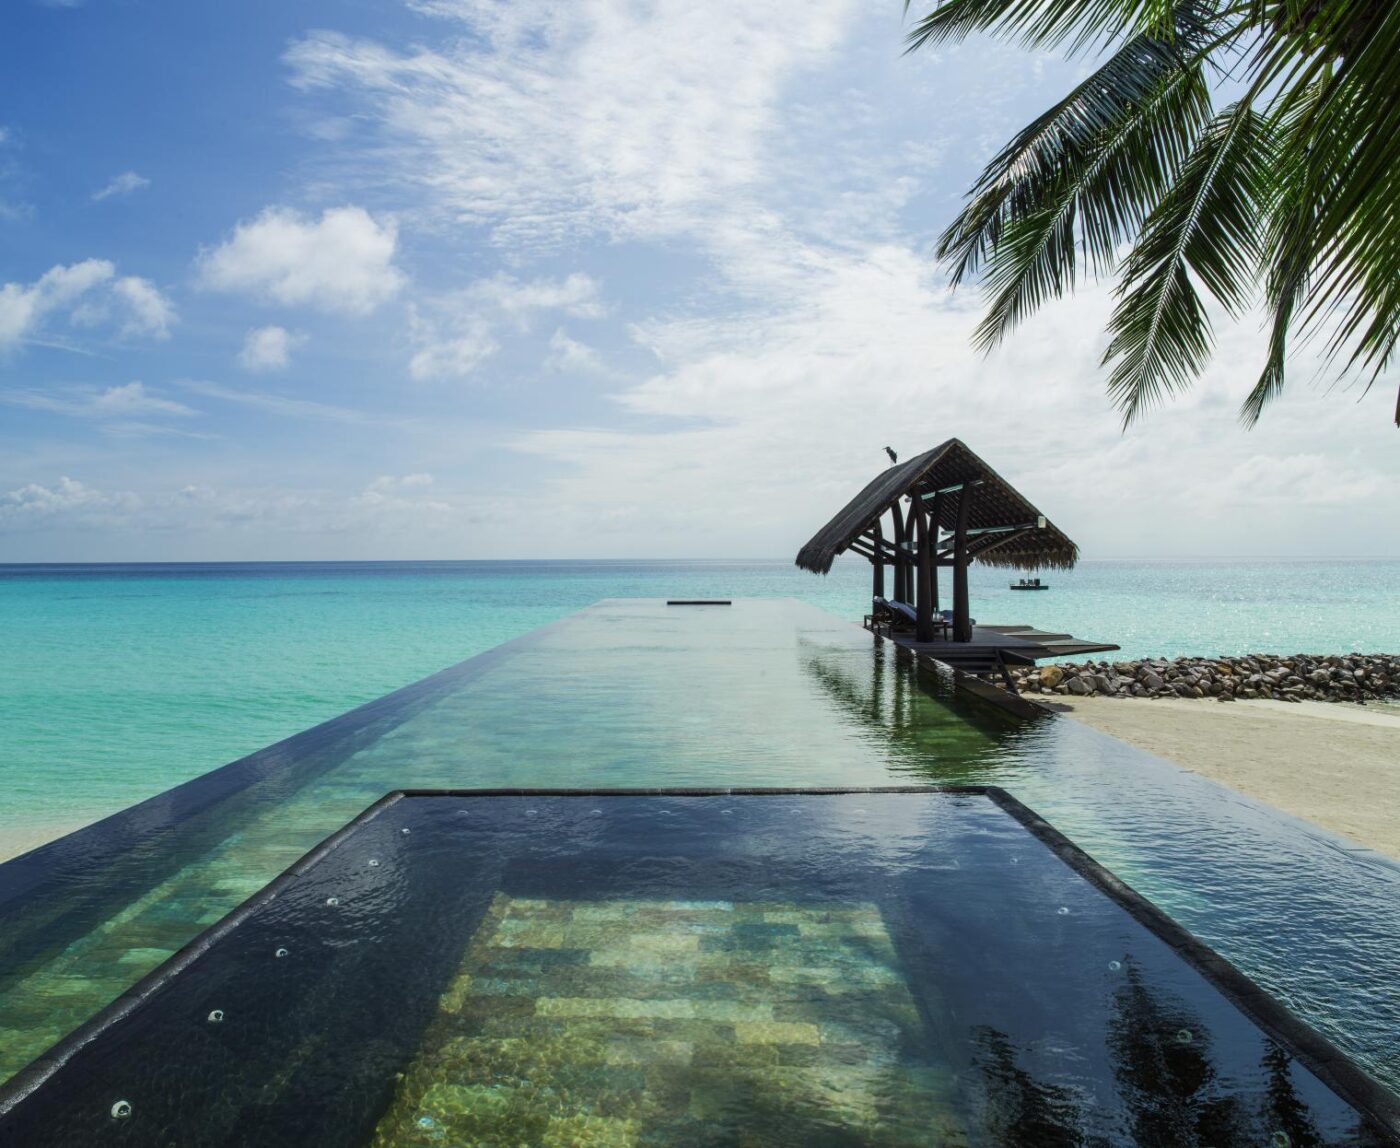 The One And Only Reethi Rah, Maldives